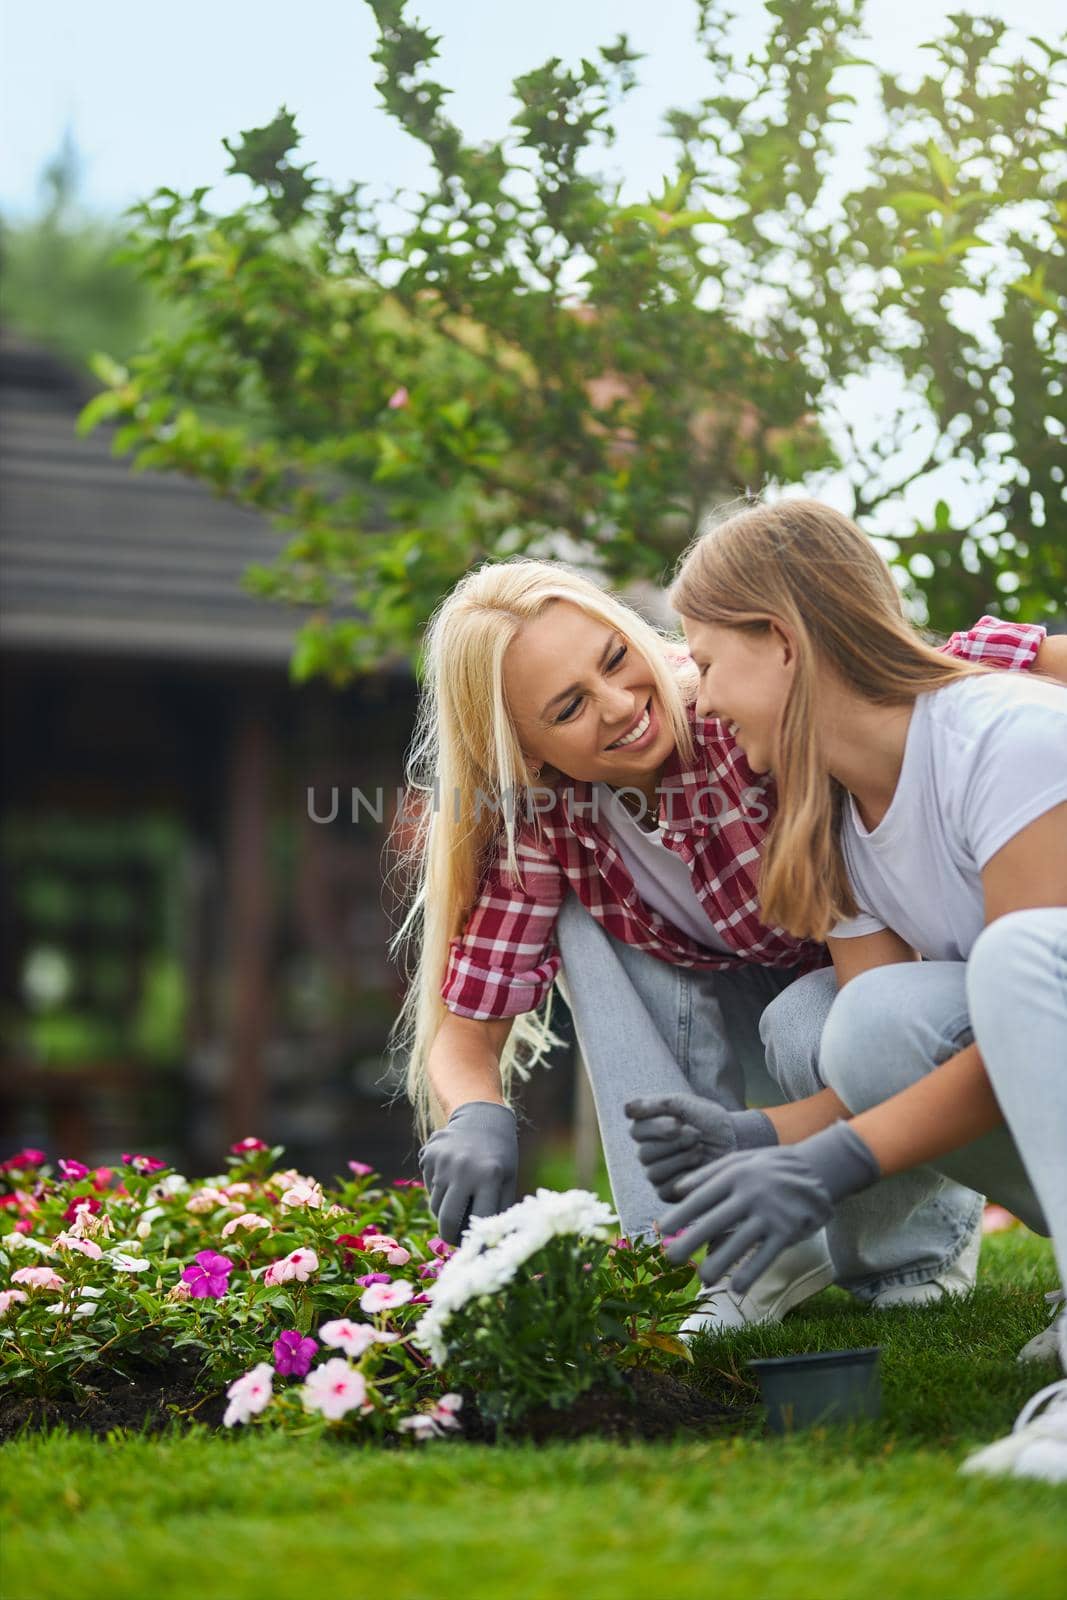 Caring caucasian mother teaching her teen daughter to take care of plants on backyard. Woman and girl squatting on flowerbed, laughing and hugging during working process.